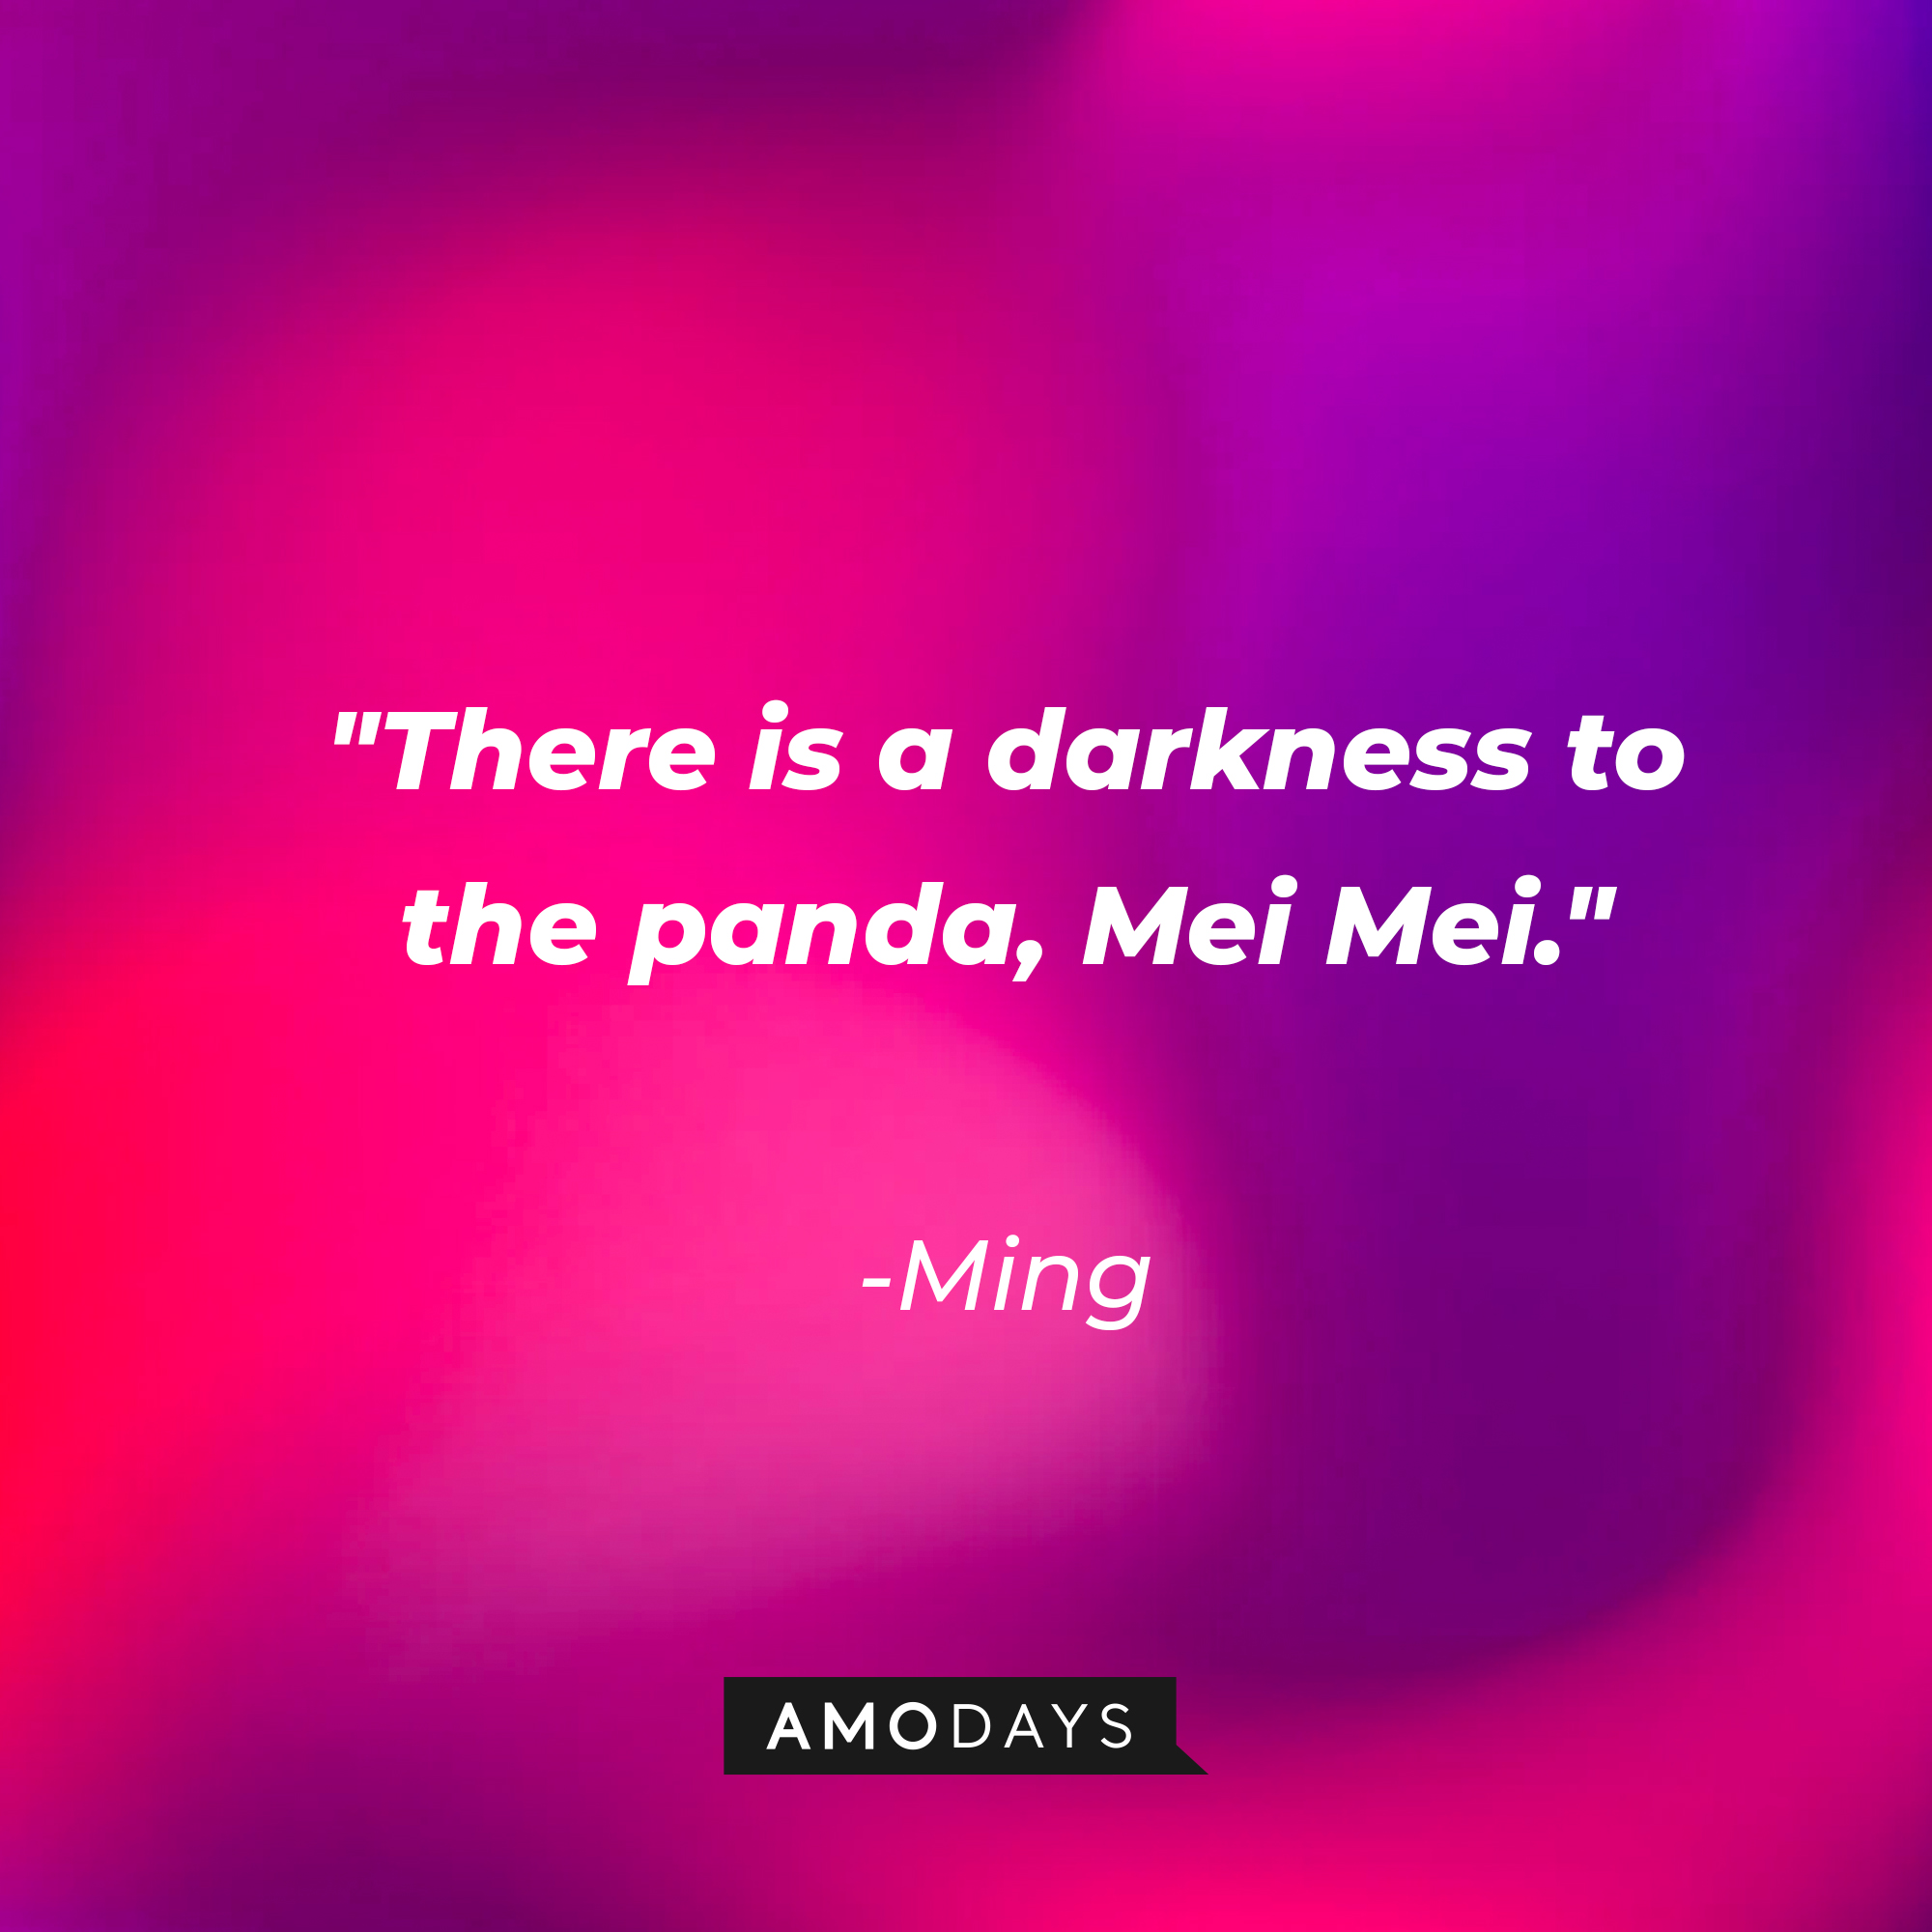 Ming's quote: "There is a darkness to the panda, Mei Mei." | Source: AmoDays